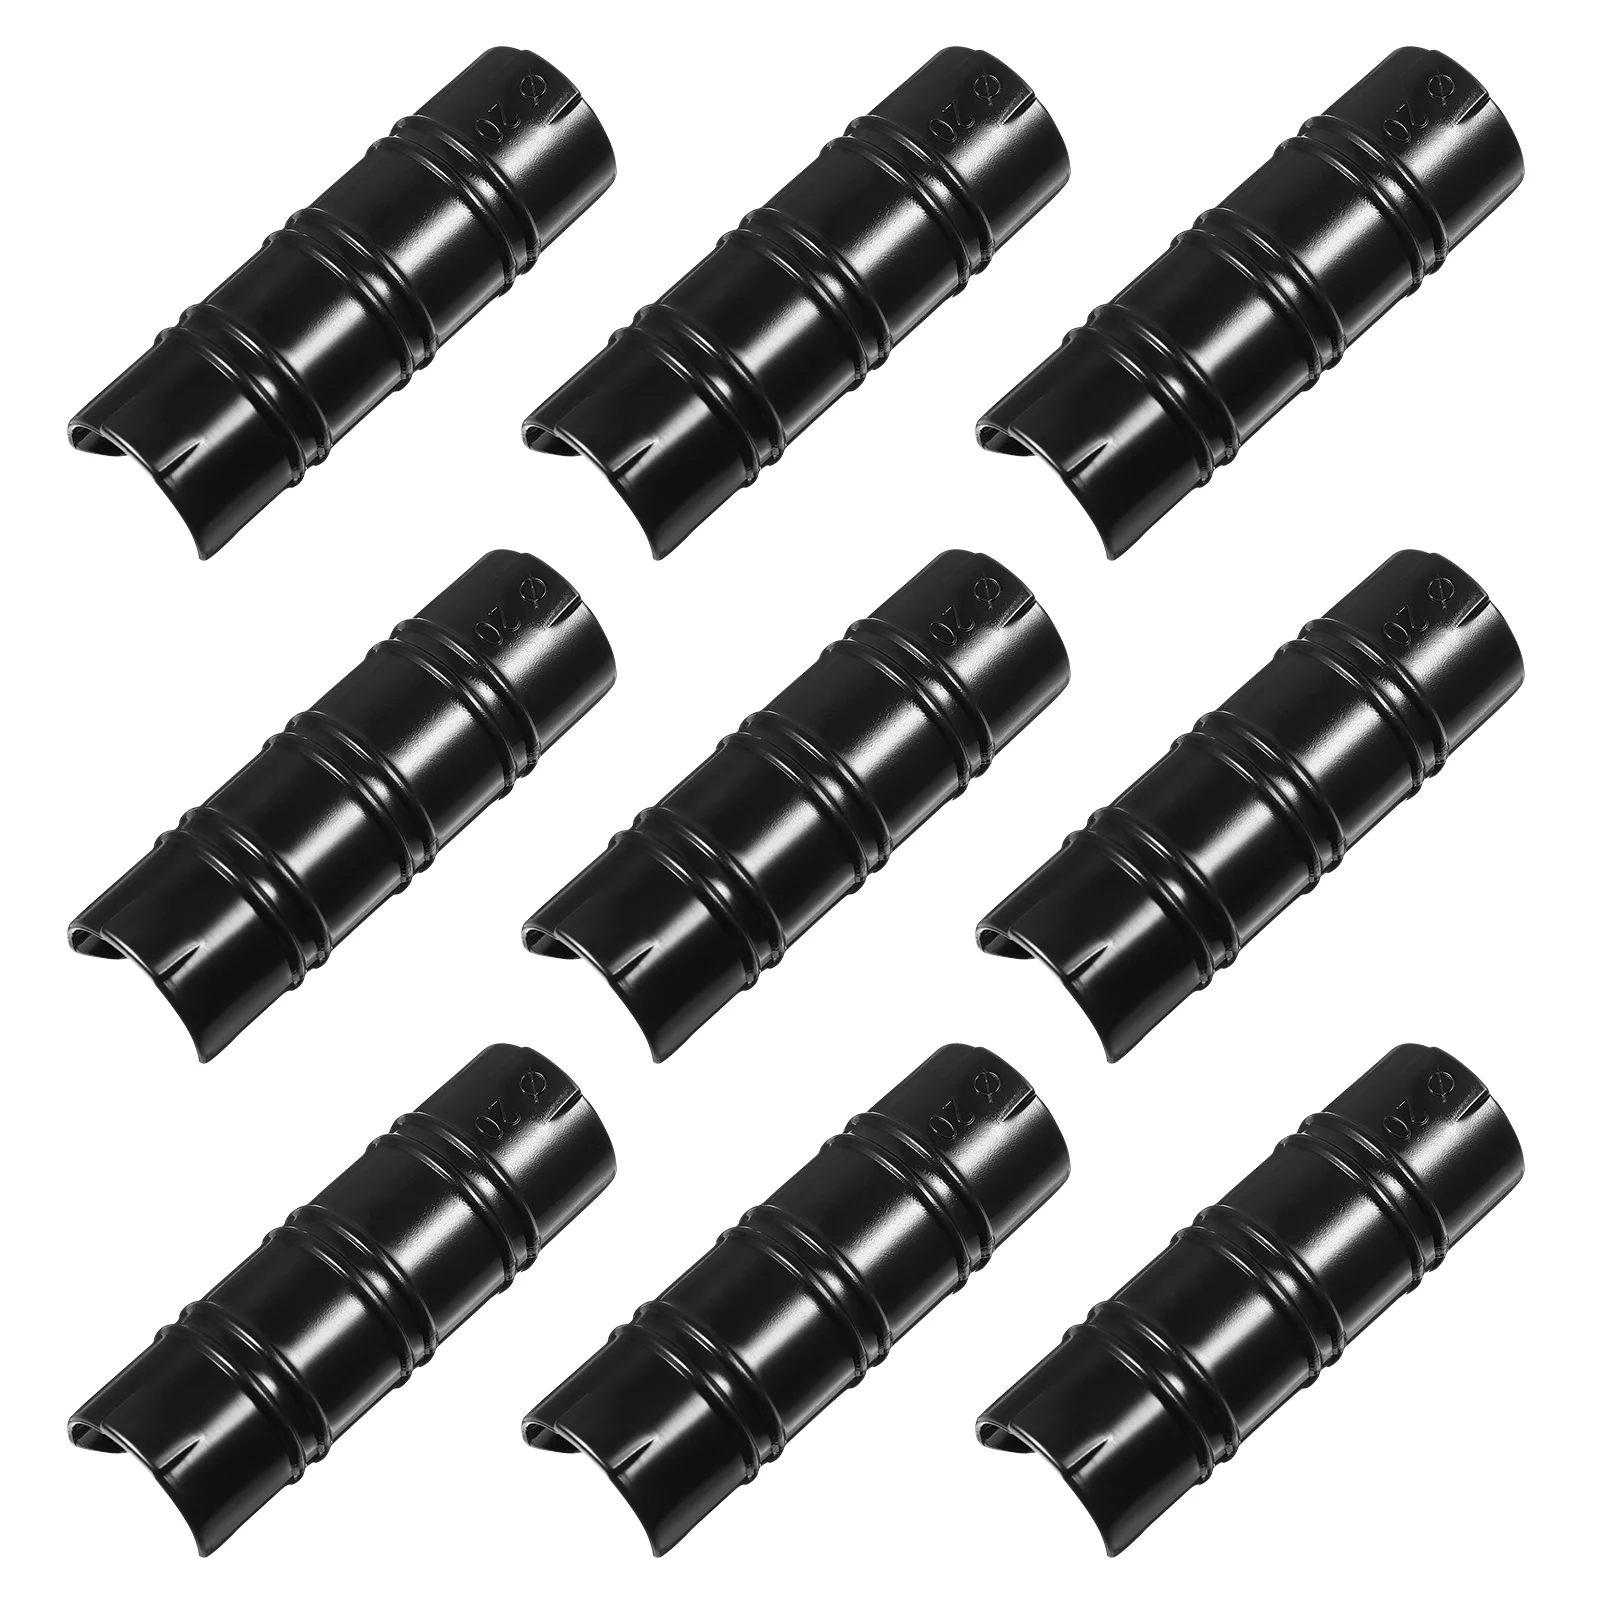 

30pcs Greenhouse Frame Pipe Clamps Garden Tube Clamps Plastic Snap Pipe Clips Tube Clamps (Black)